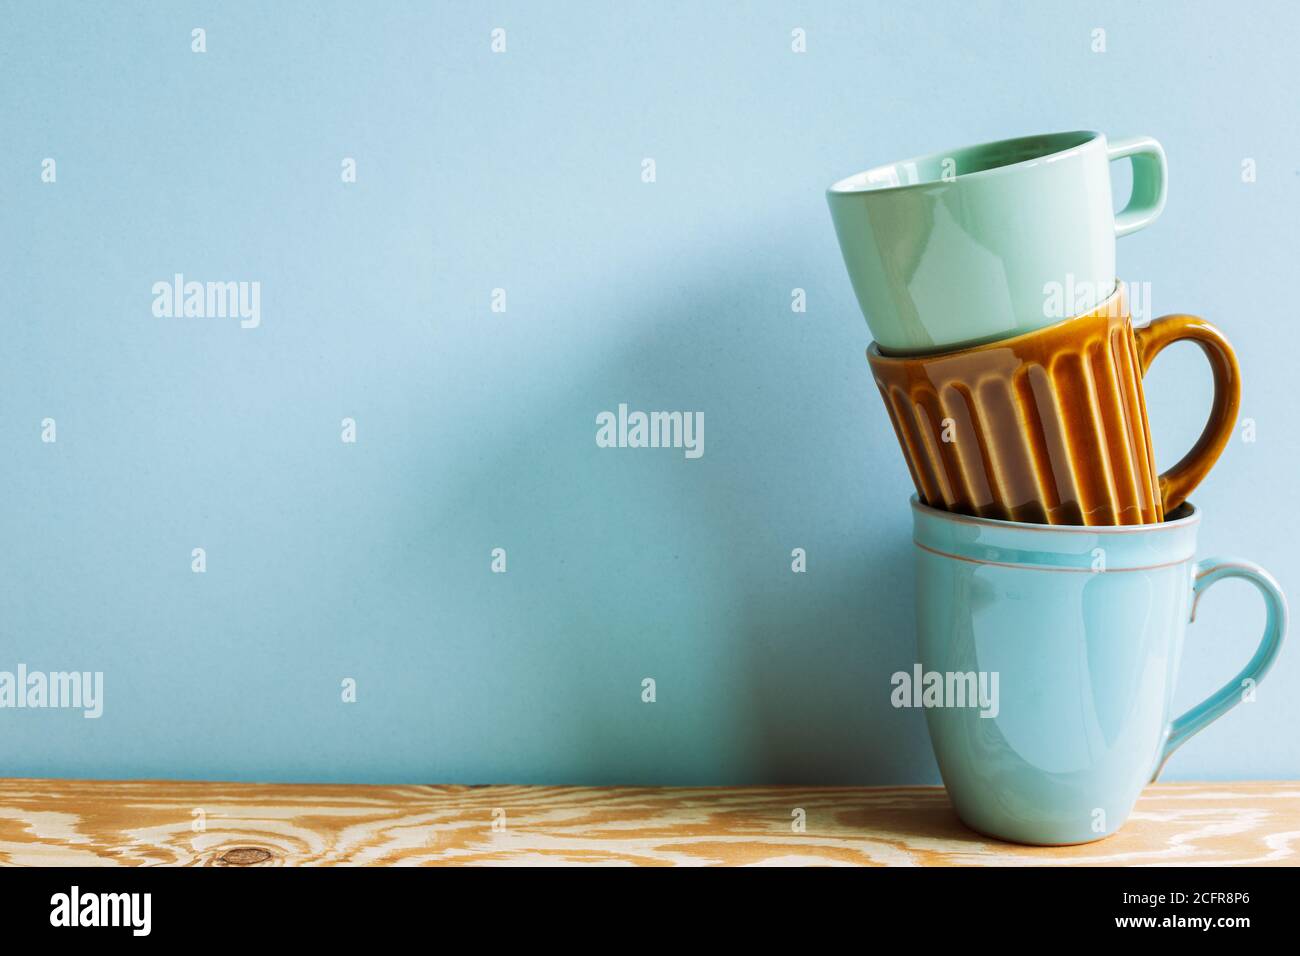 Stack of ceramic mug cups on wooden table with blue background Stock Photo